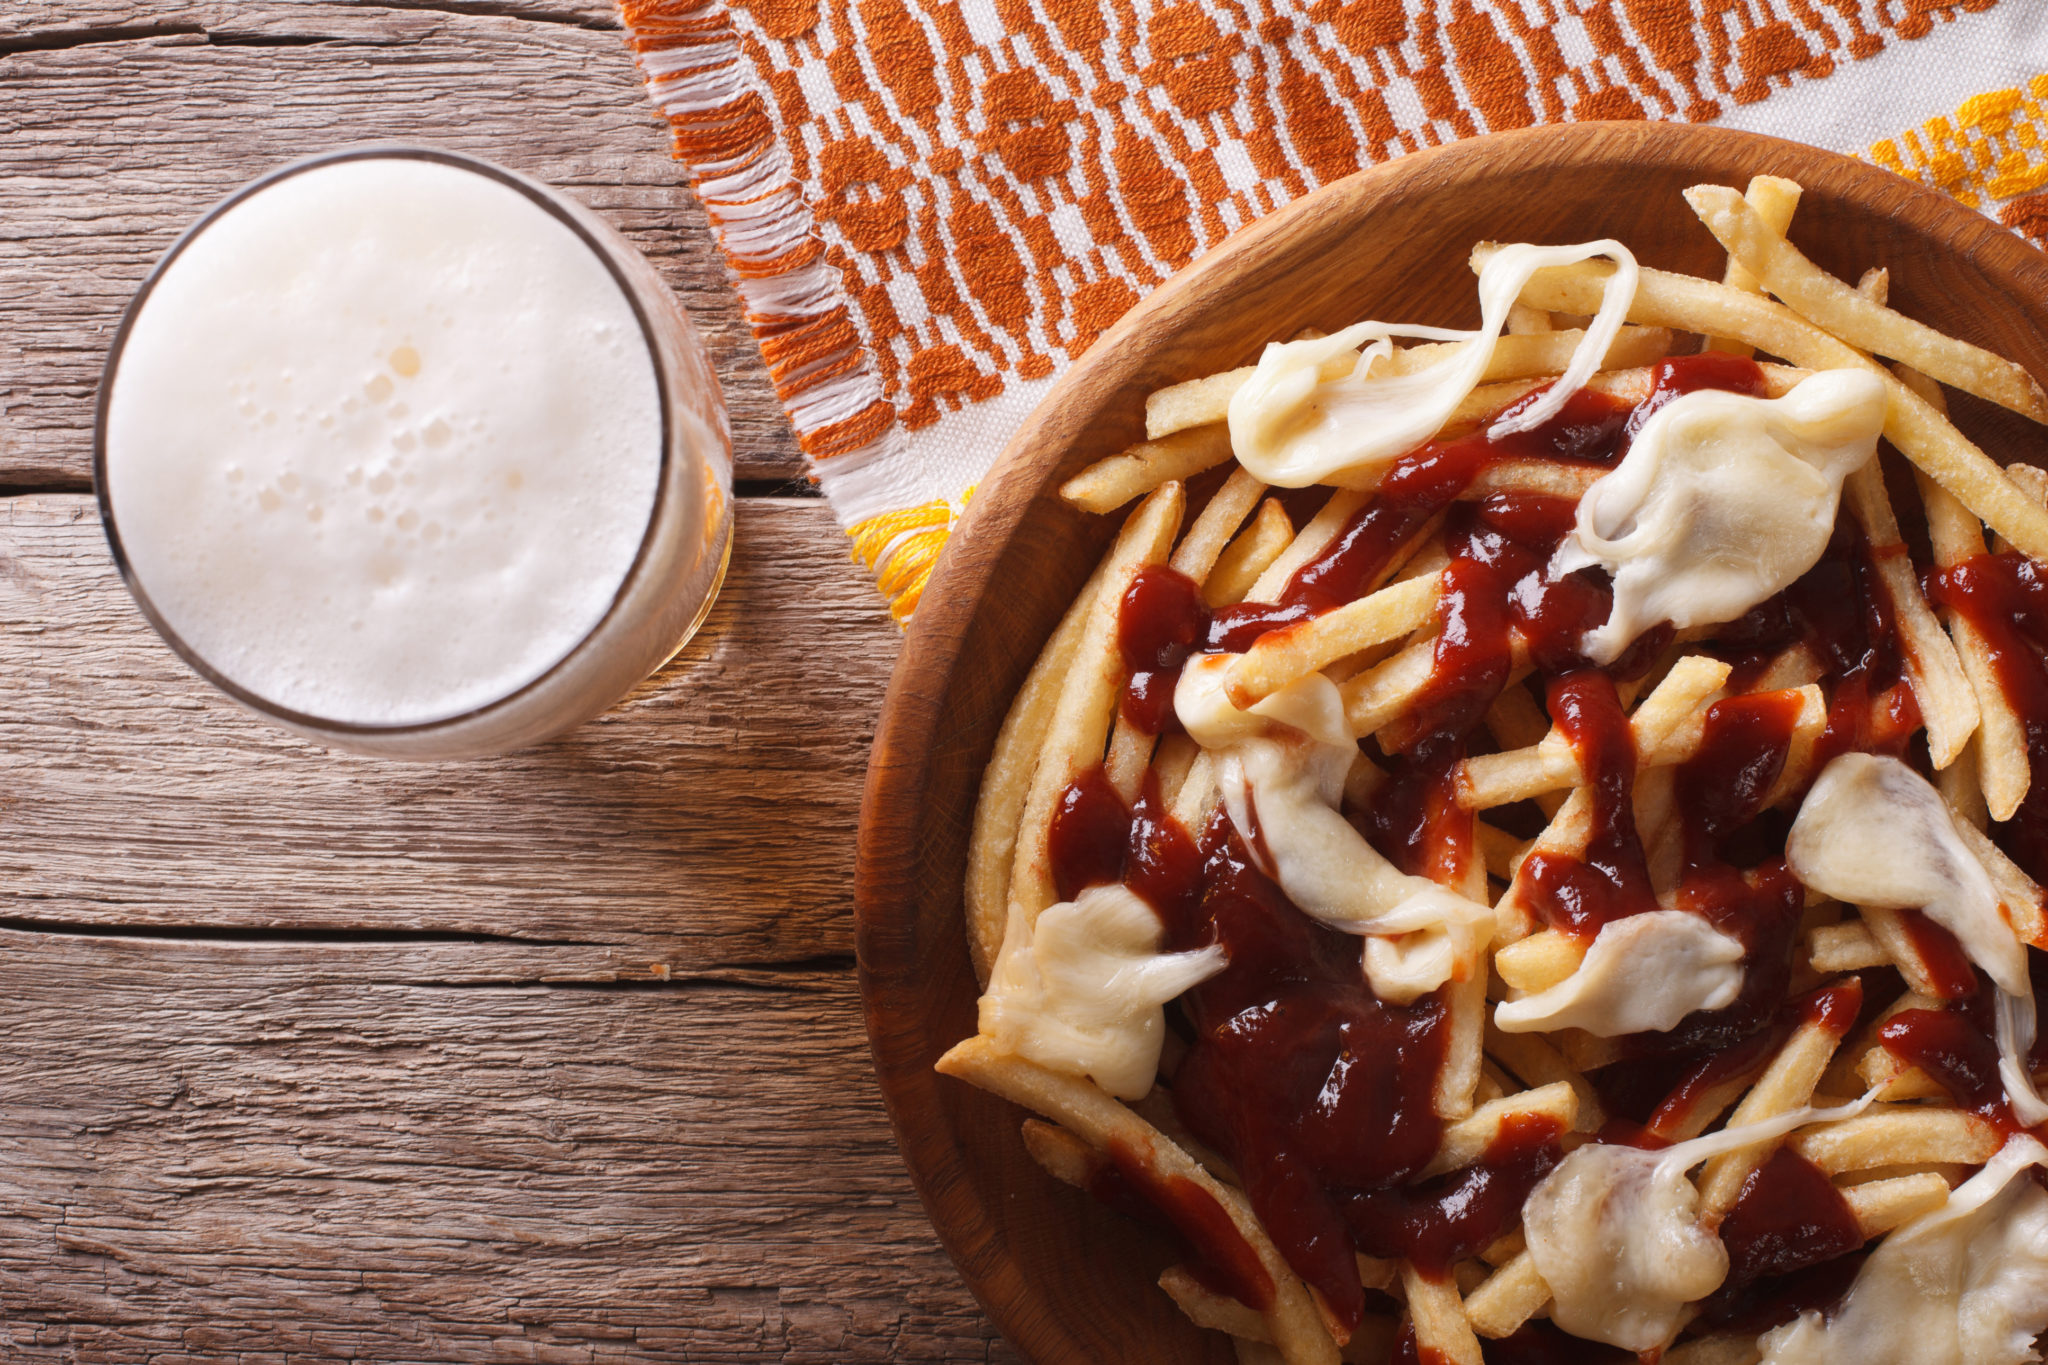 Canadian food: beer and fries with sauce close-up. horizontal to